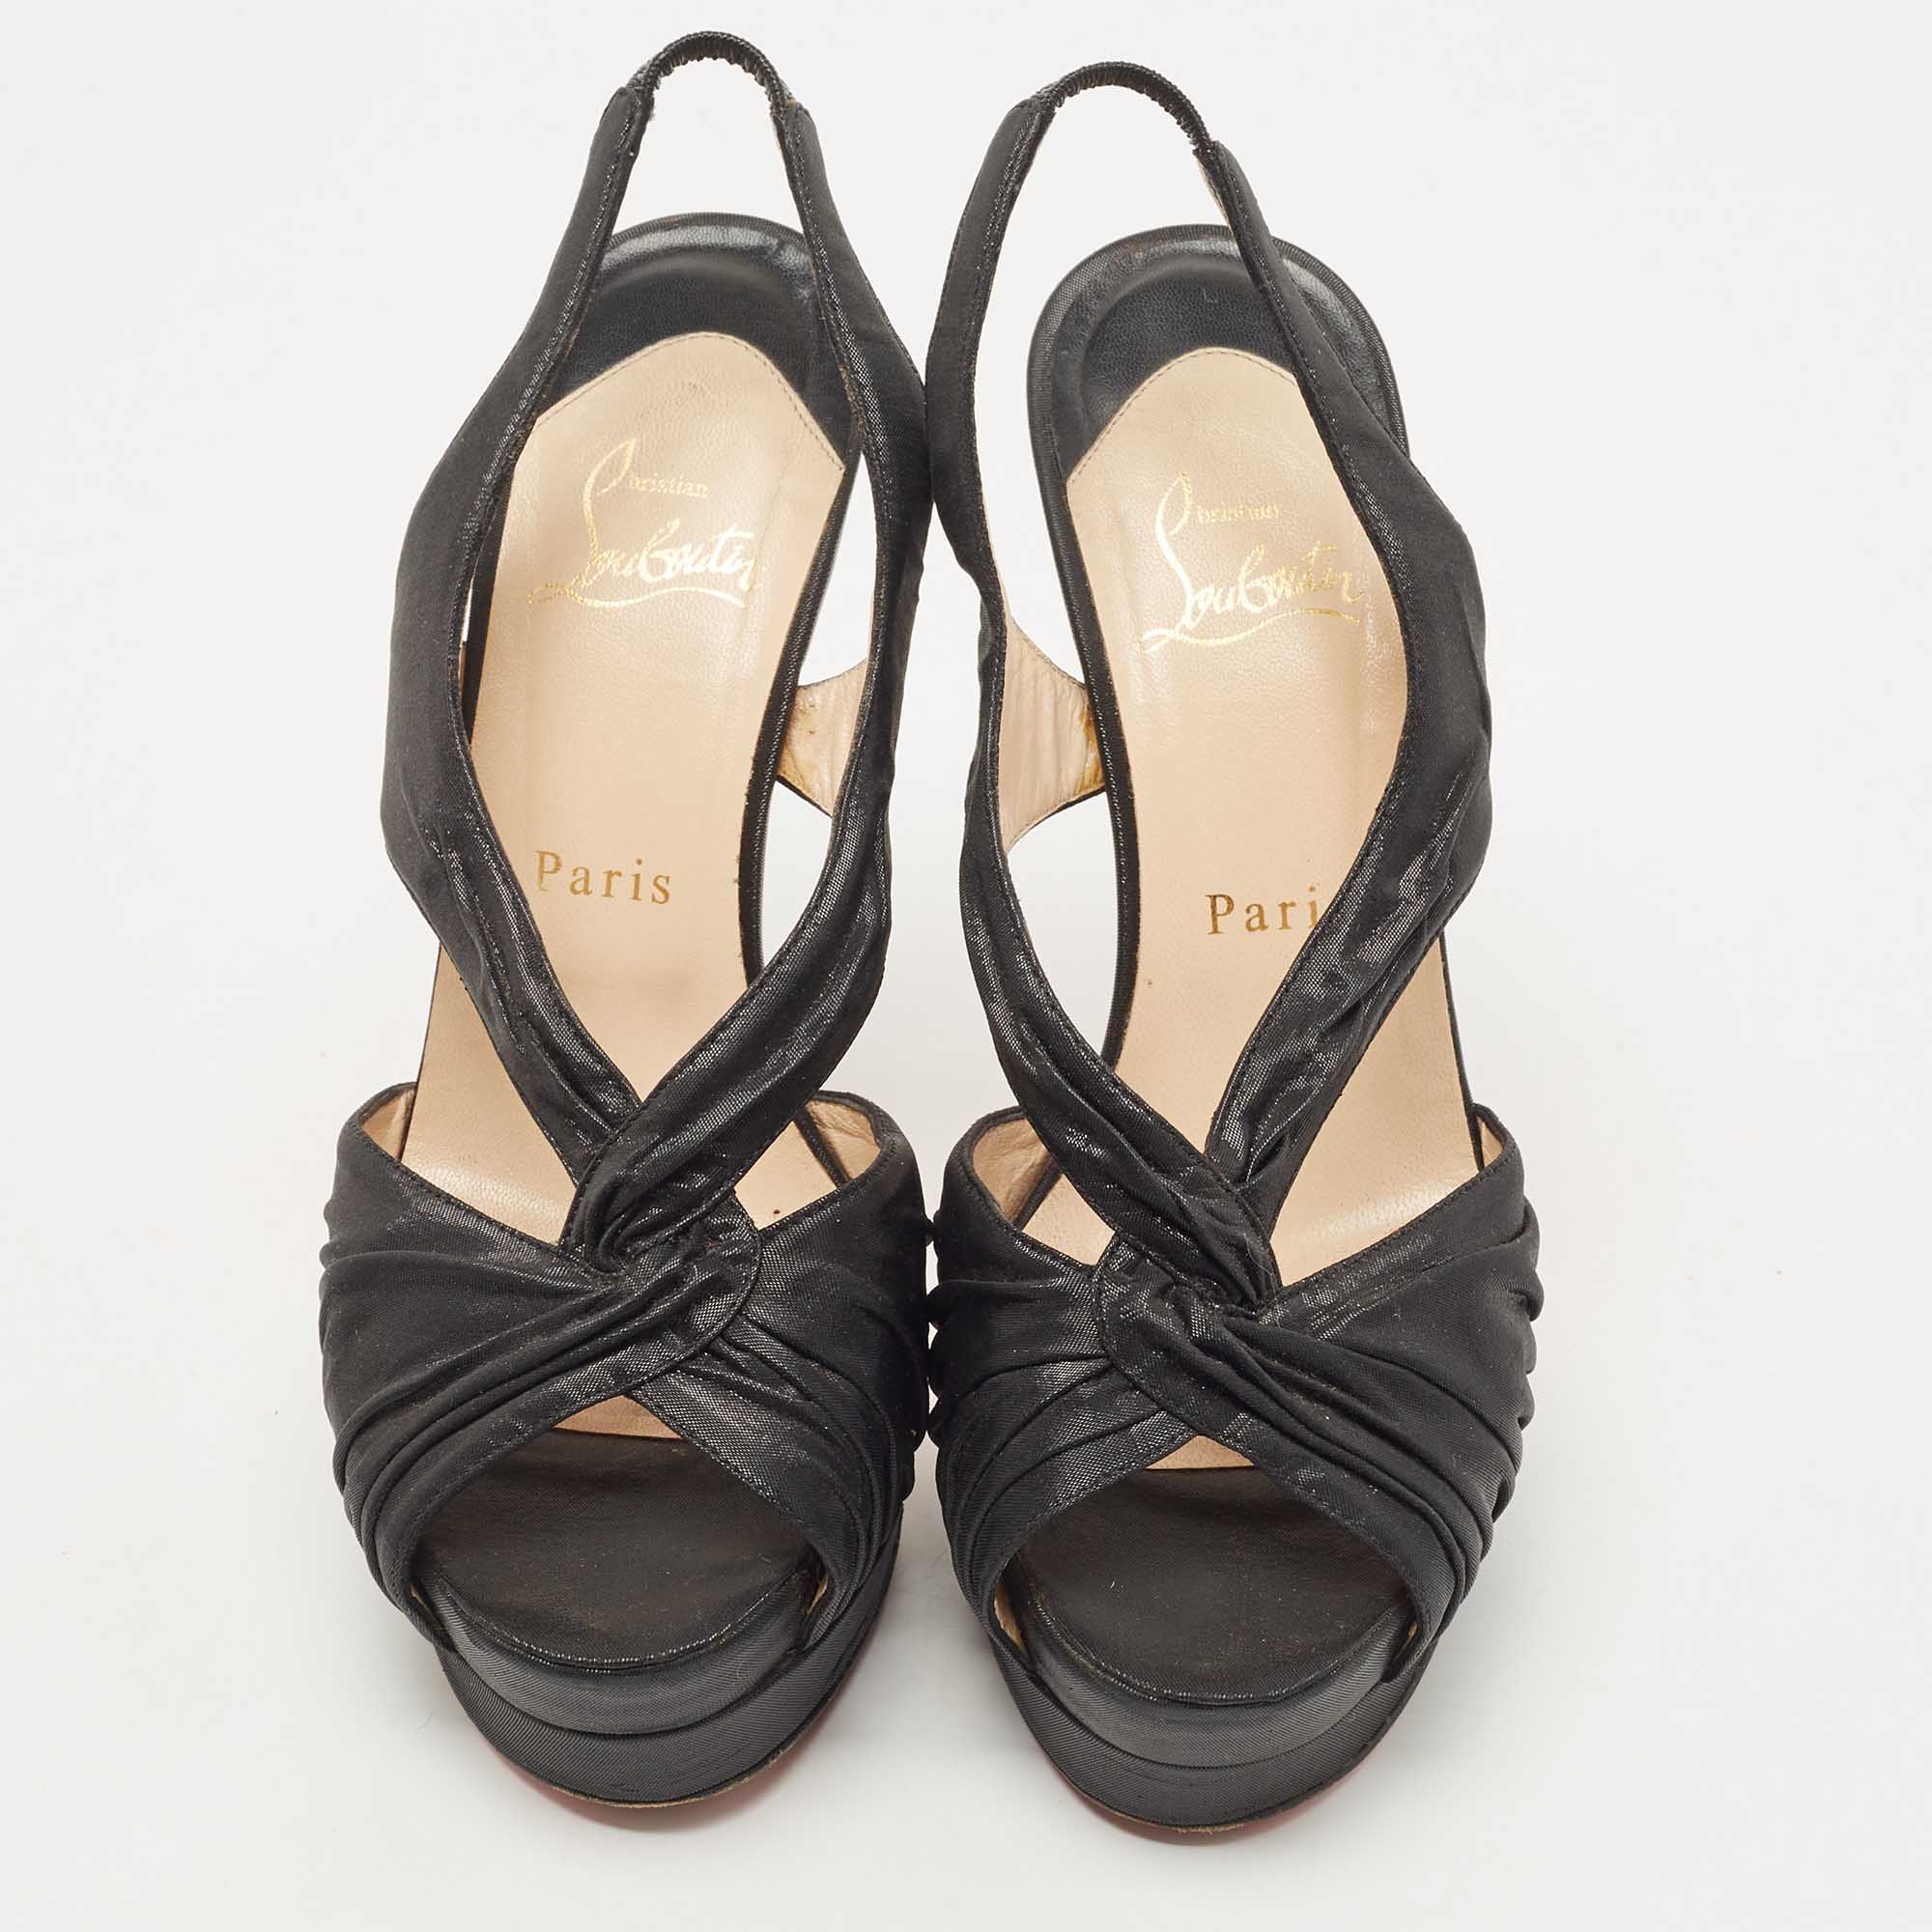 Christian Louboutin Black Shimmery Fabric Fortuna Sandals Size 37.5